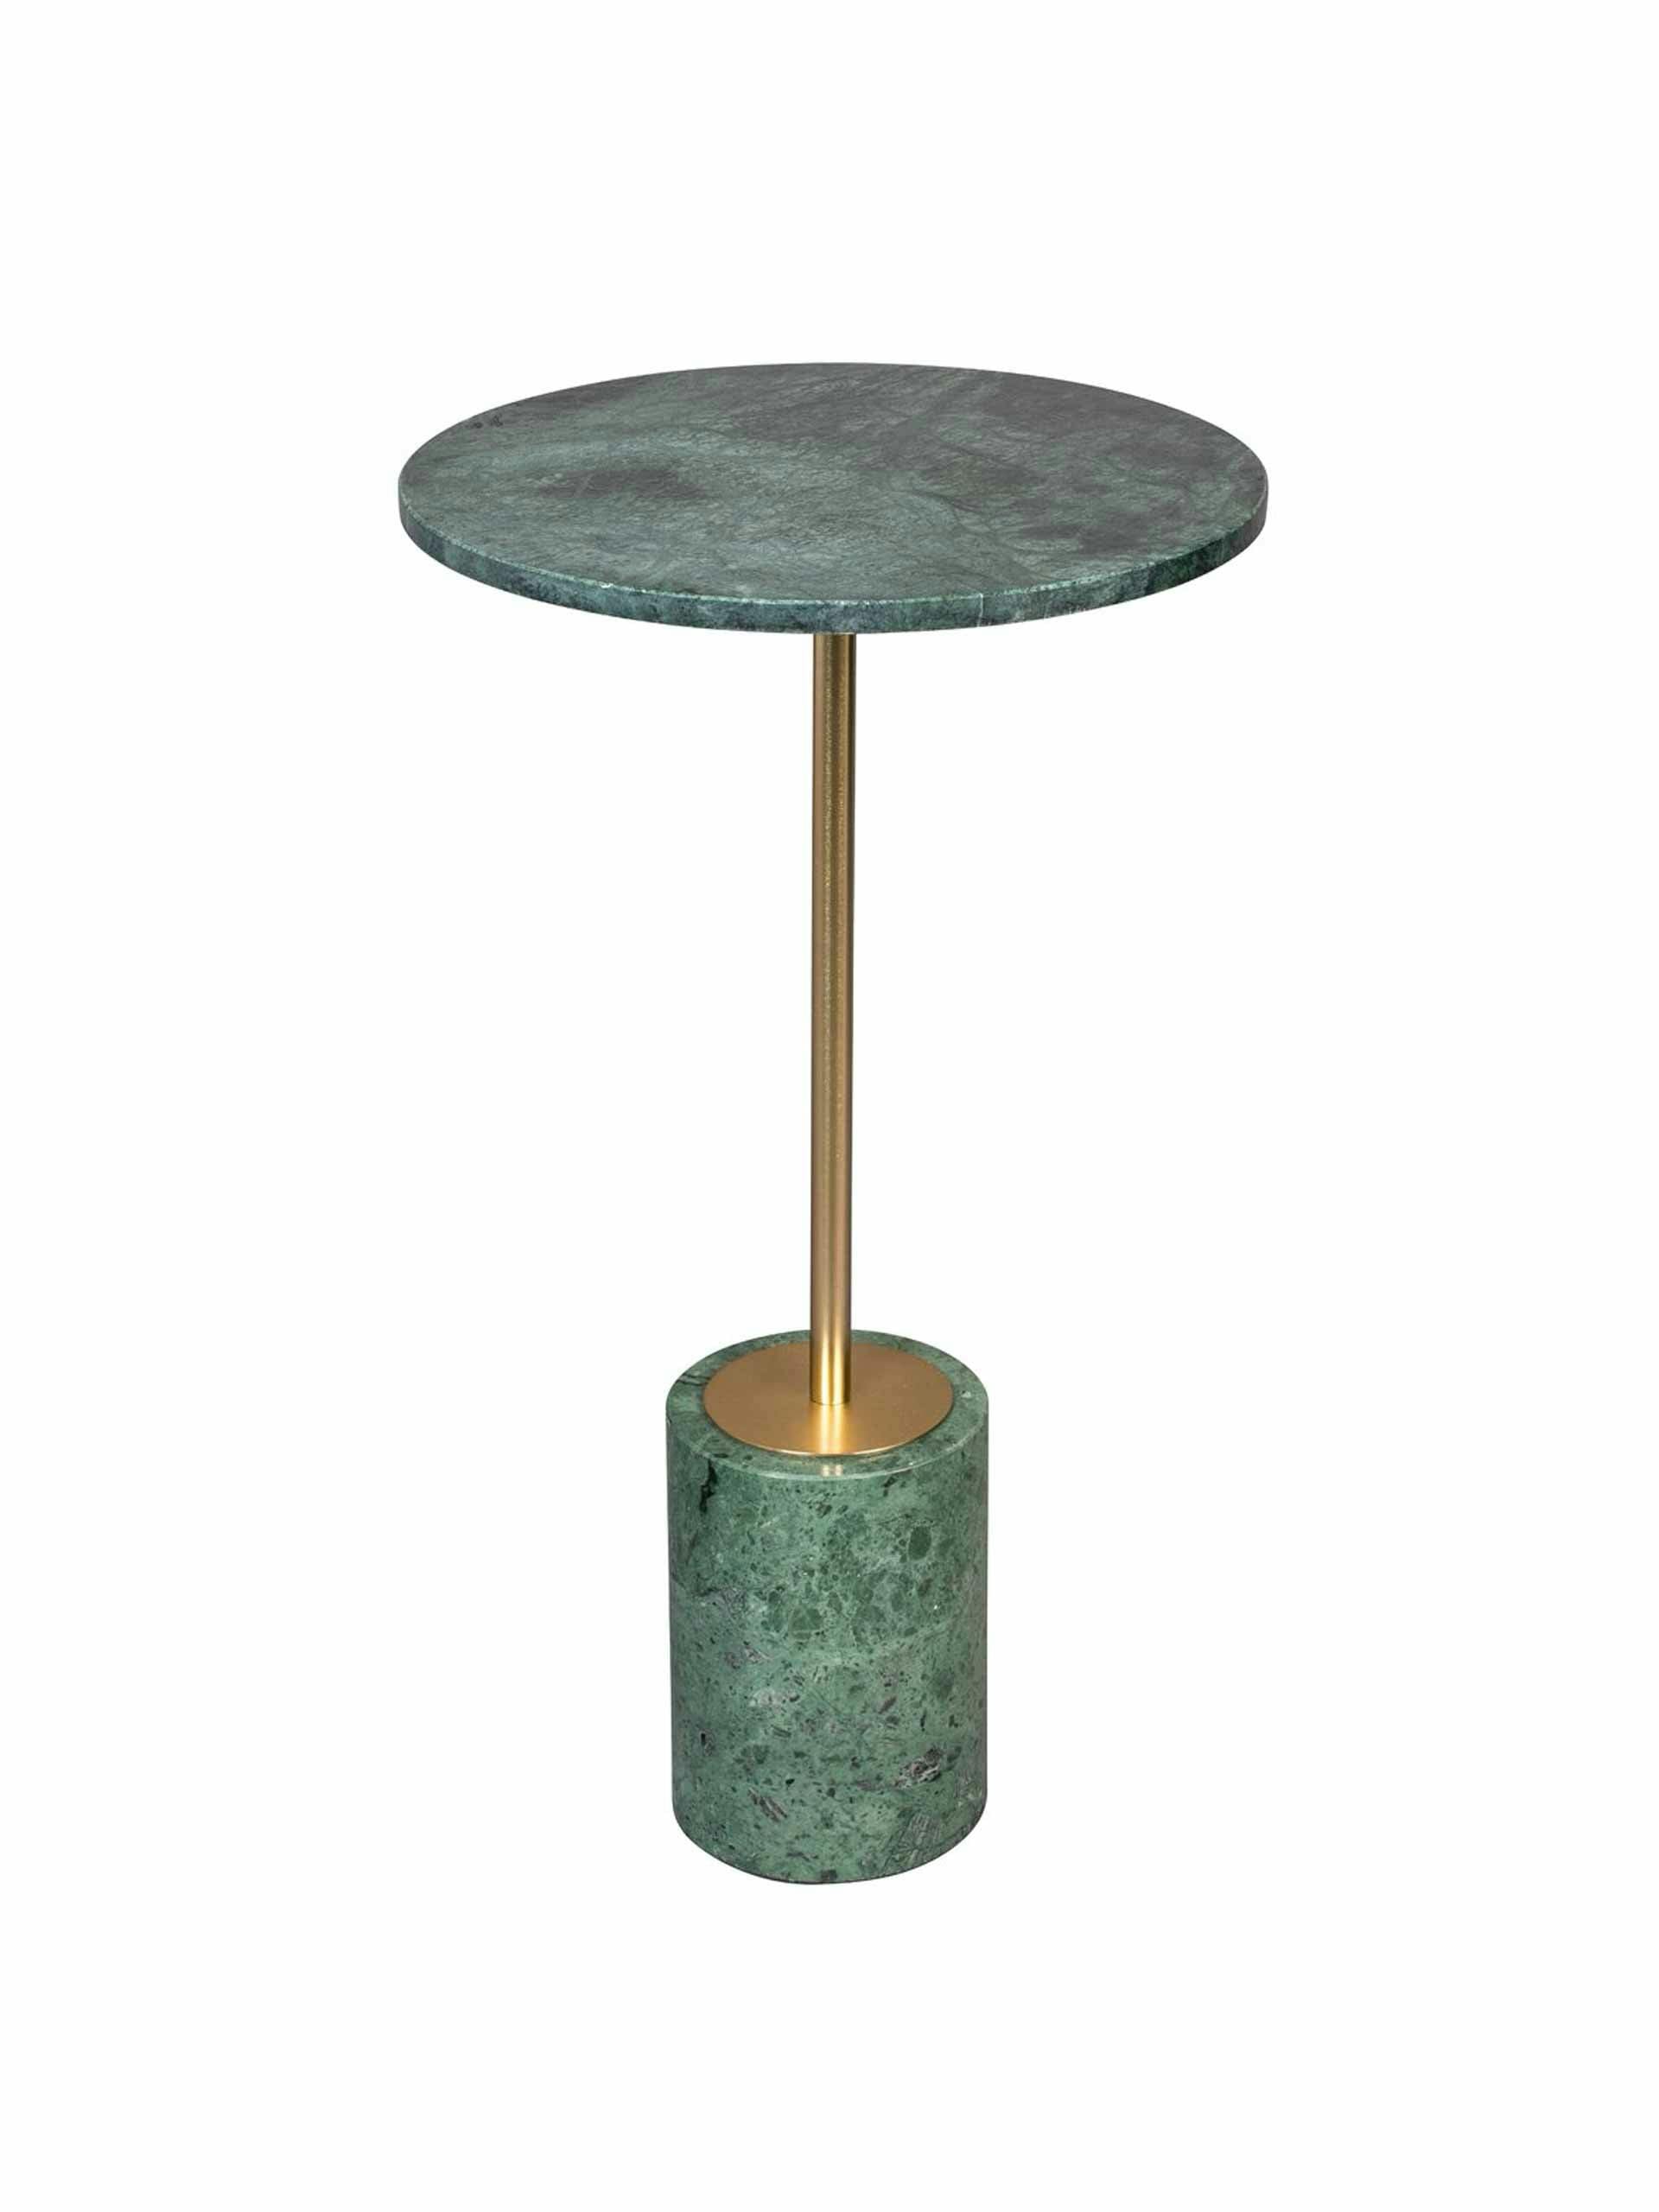 Green and gold side table